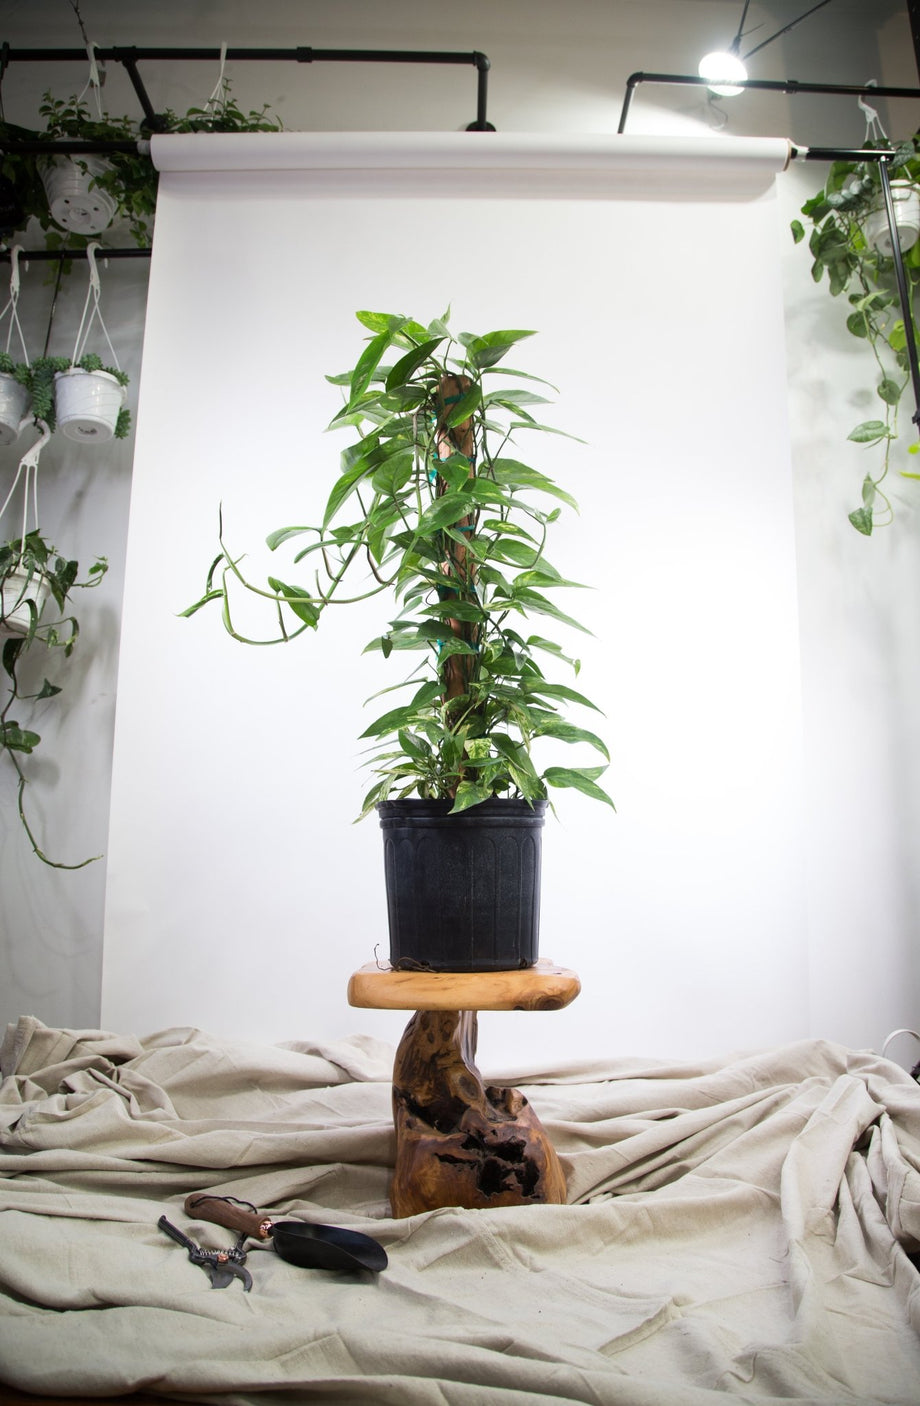 How to Grow and Care for Epipremnum Pinnatum